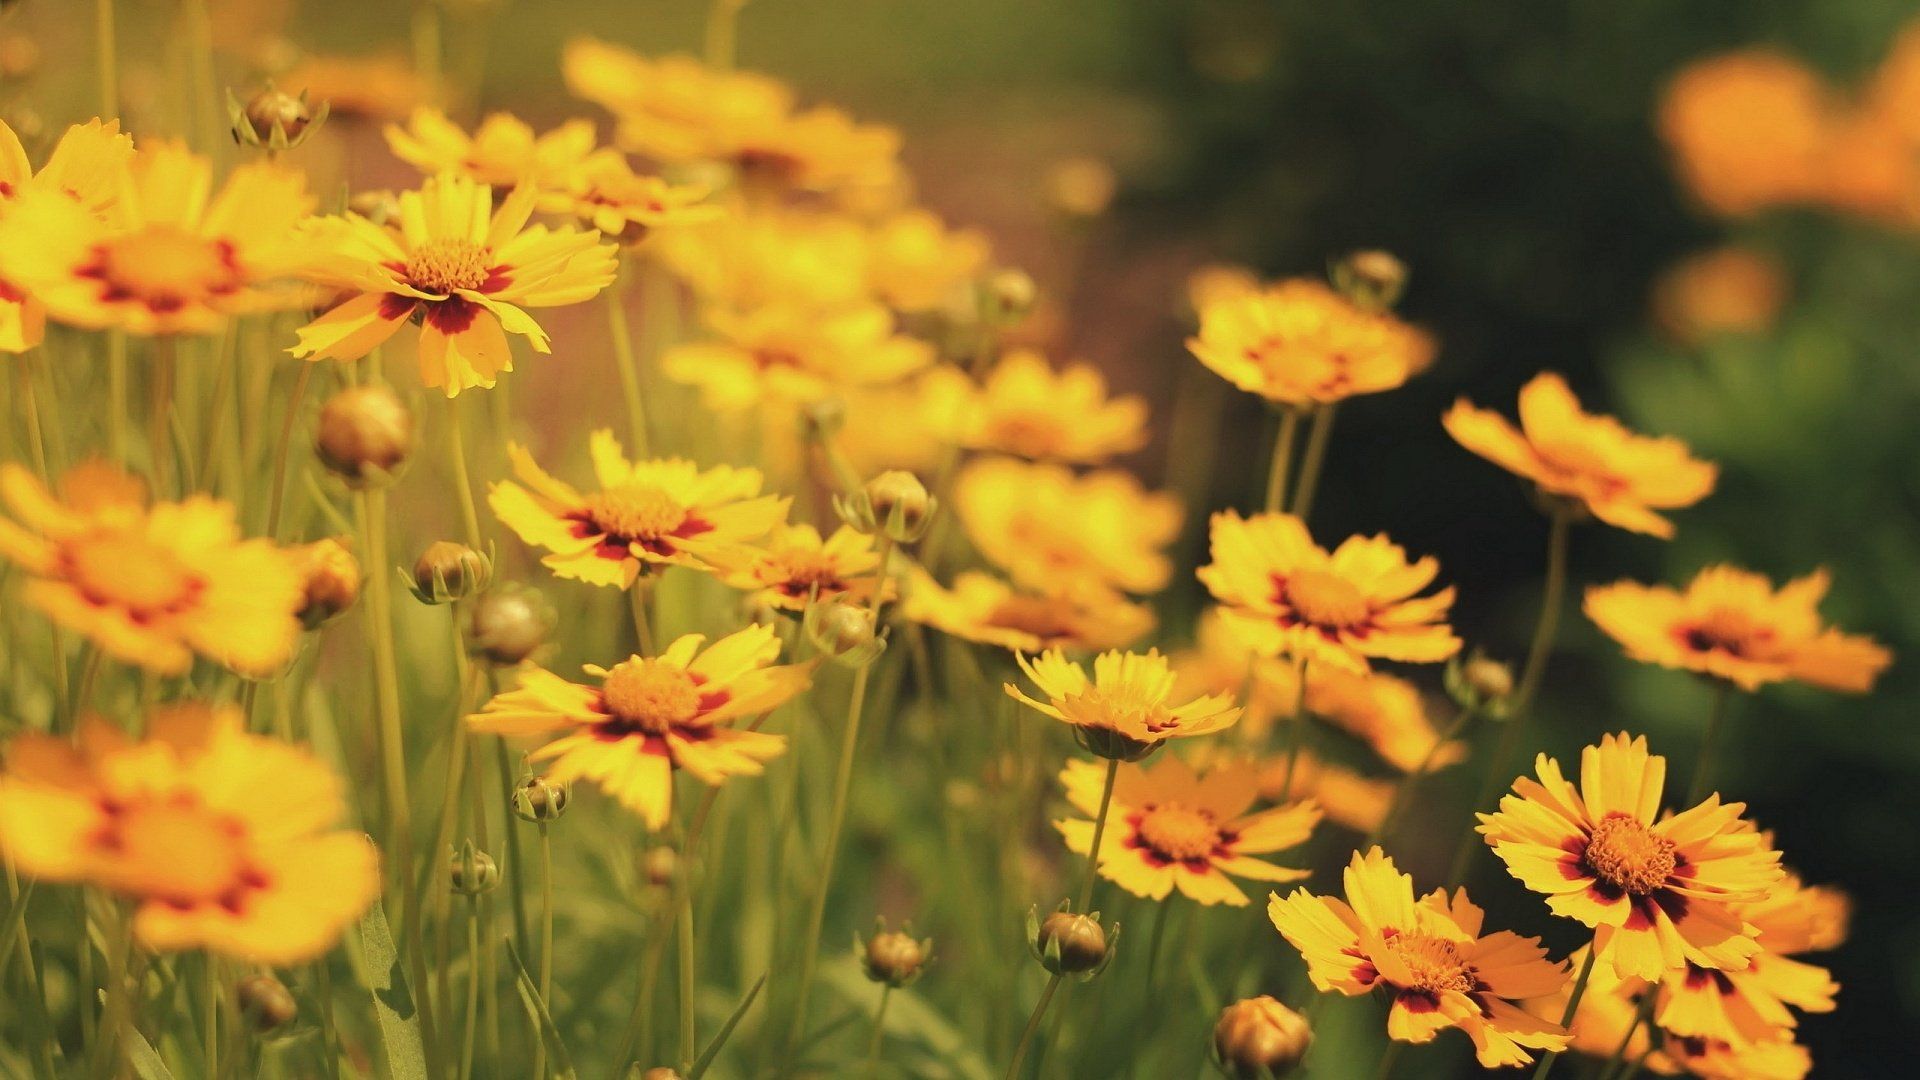 A field of yellow flowers in the sun. - Pastel yellow